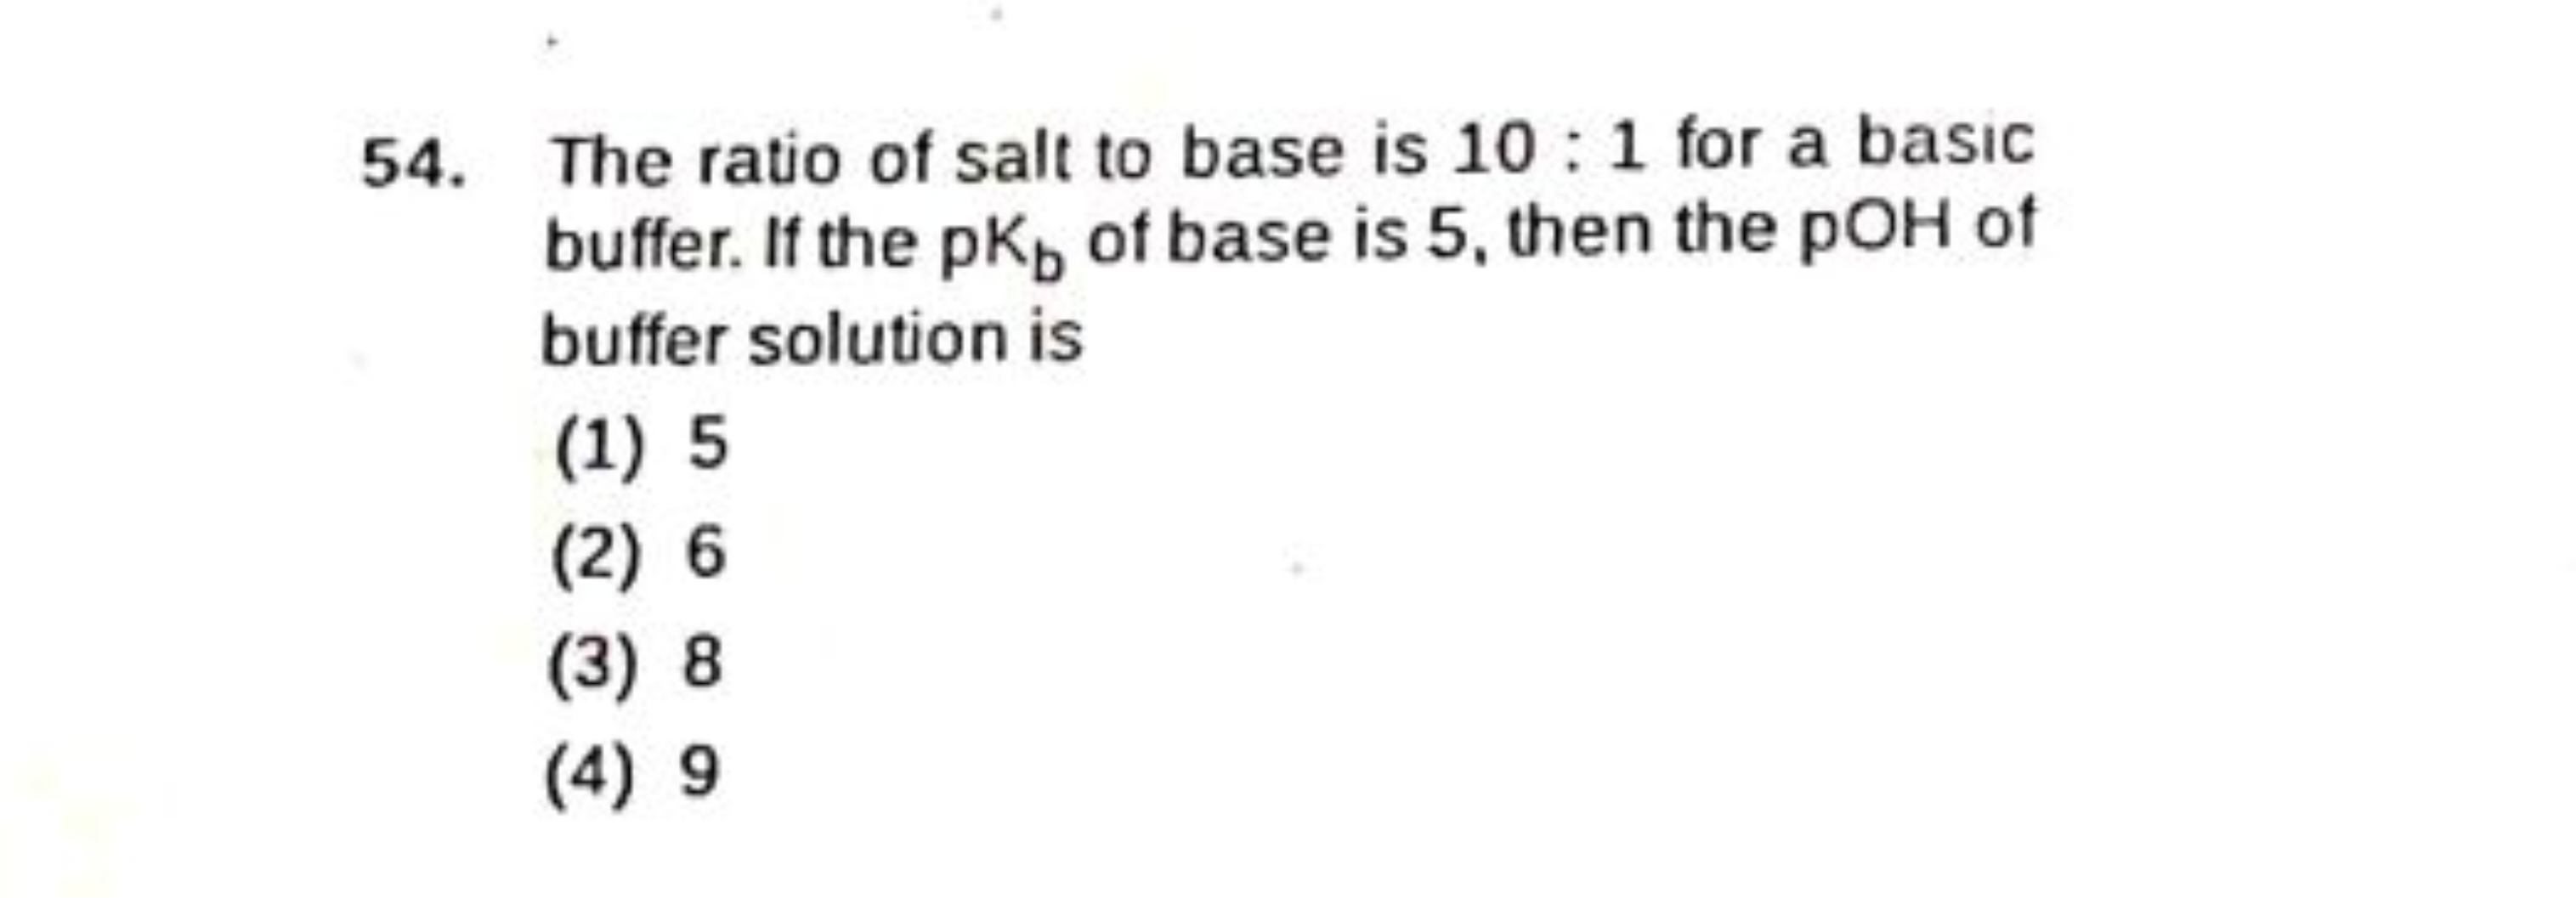 The ratio of salt to base is 10:1 for a basic buffer. If the pKb​ of b